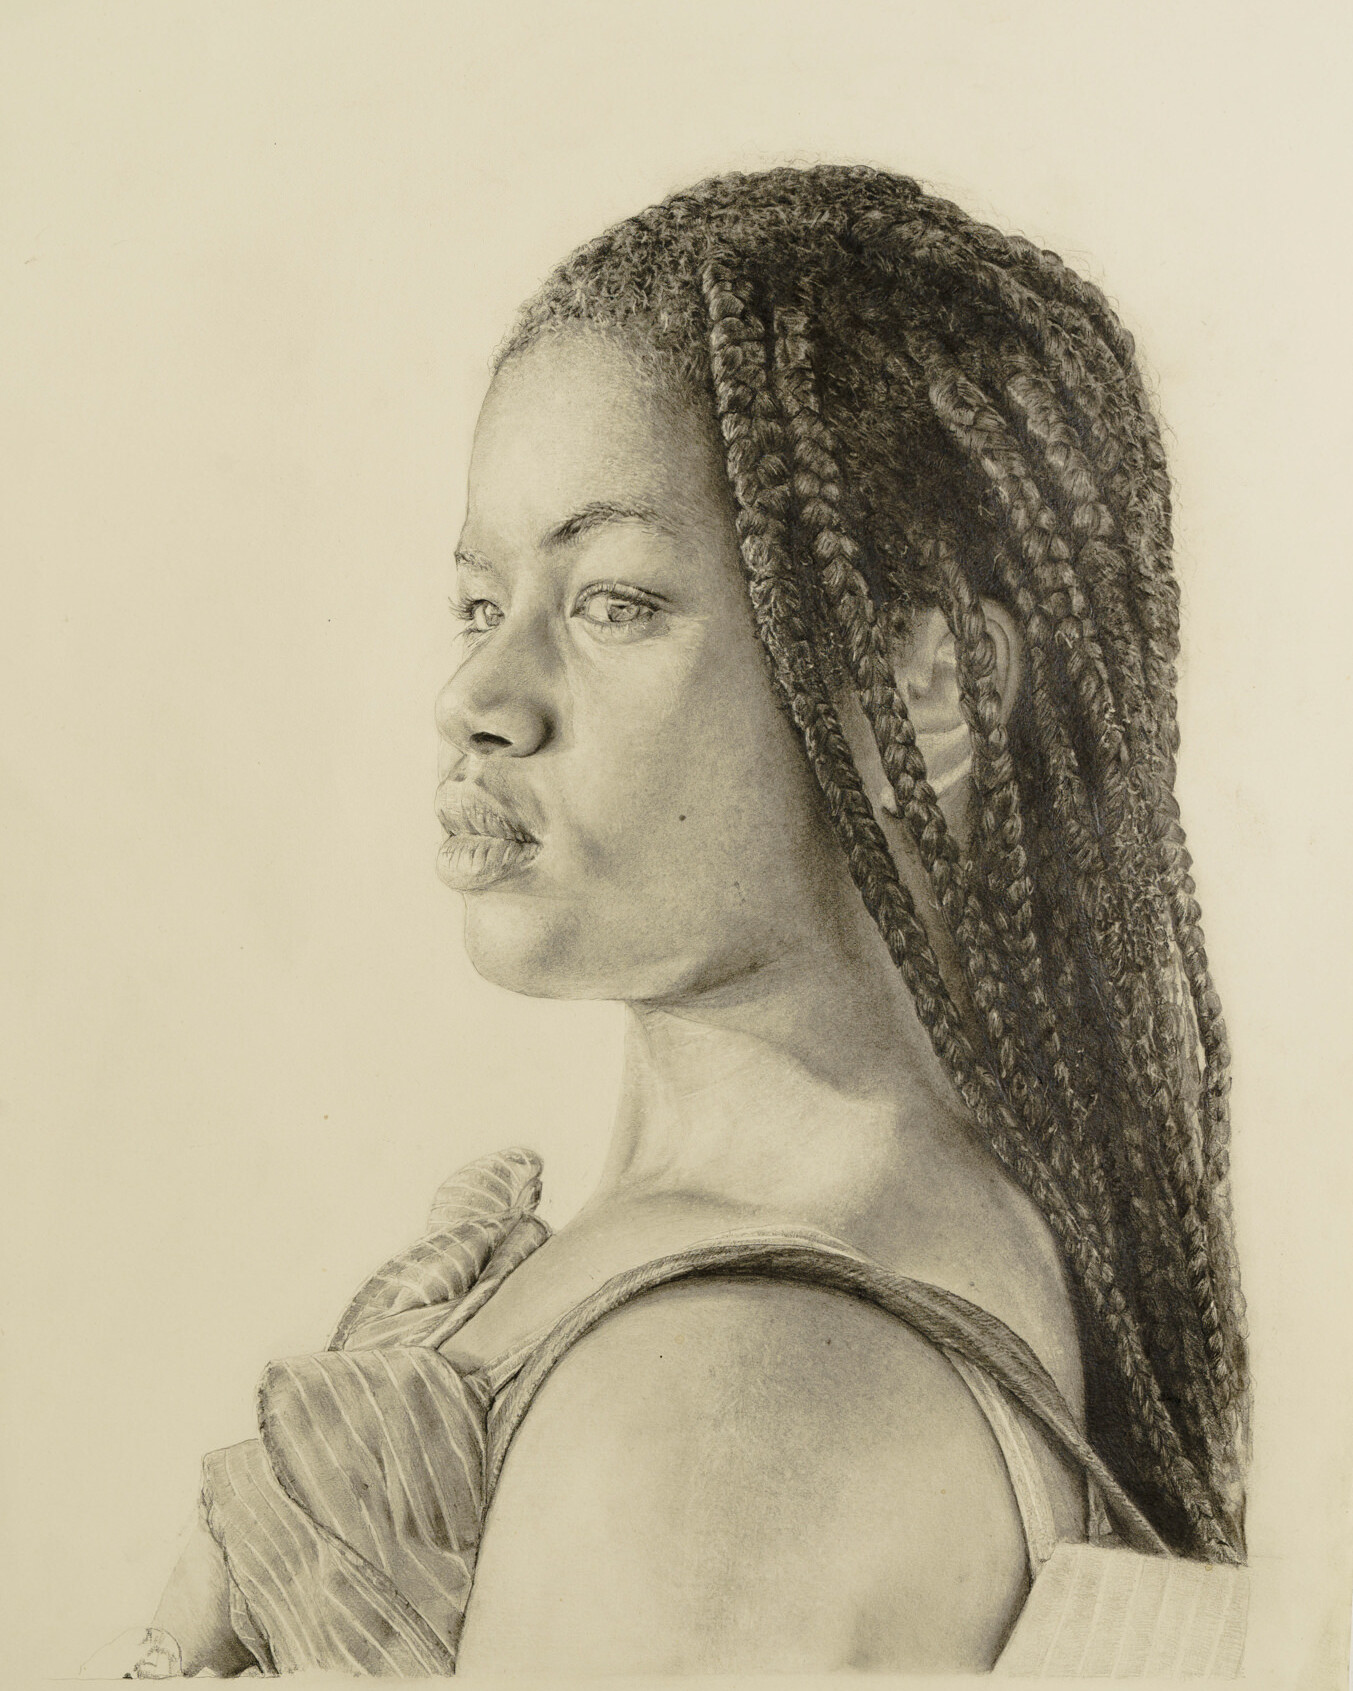 Pencil portrait of a young girl, Anastacia, with detailed braids, gazing into the distance with the ocean reflected in her eyes.